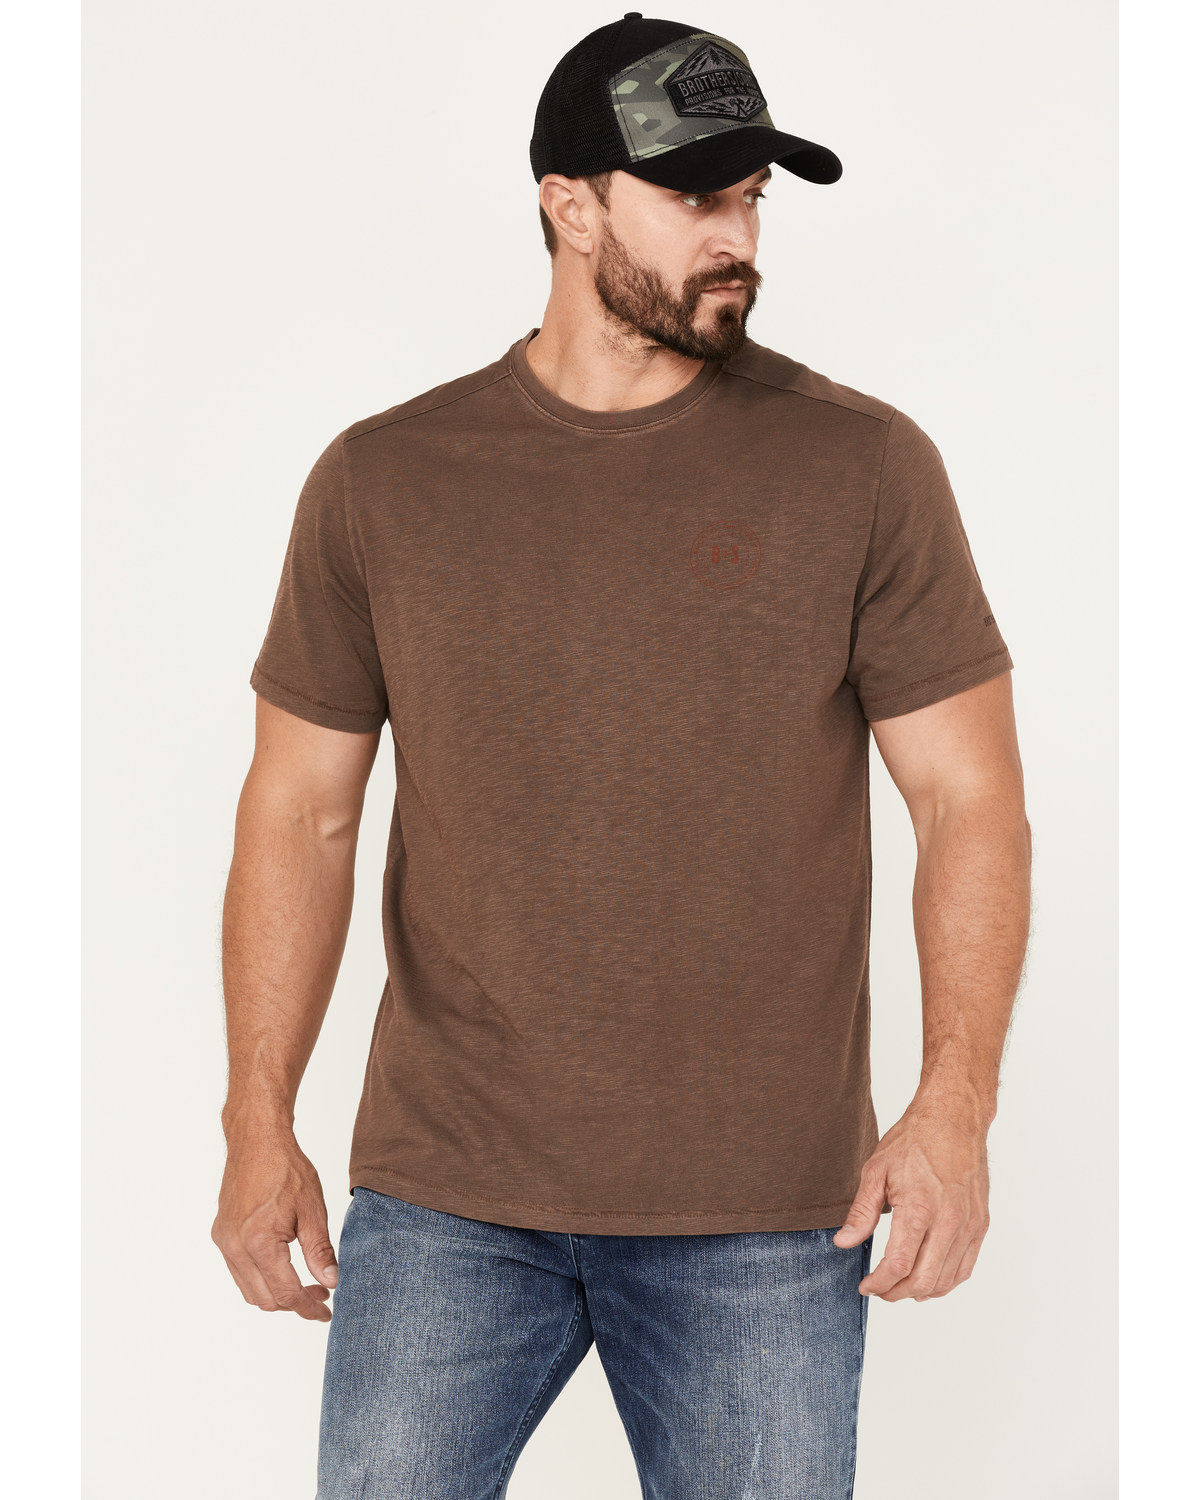 Brothers and Sons Men's Wood Logo Graphic T-Shirt